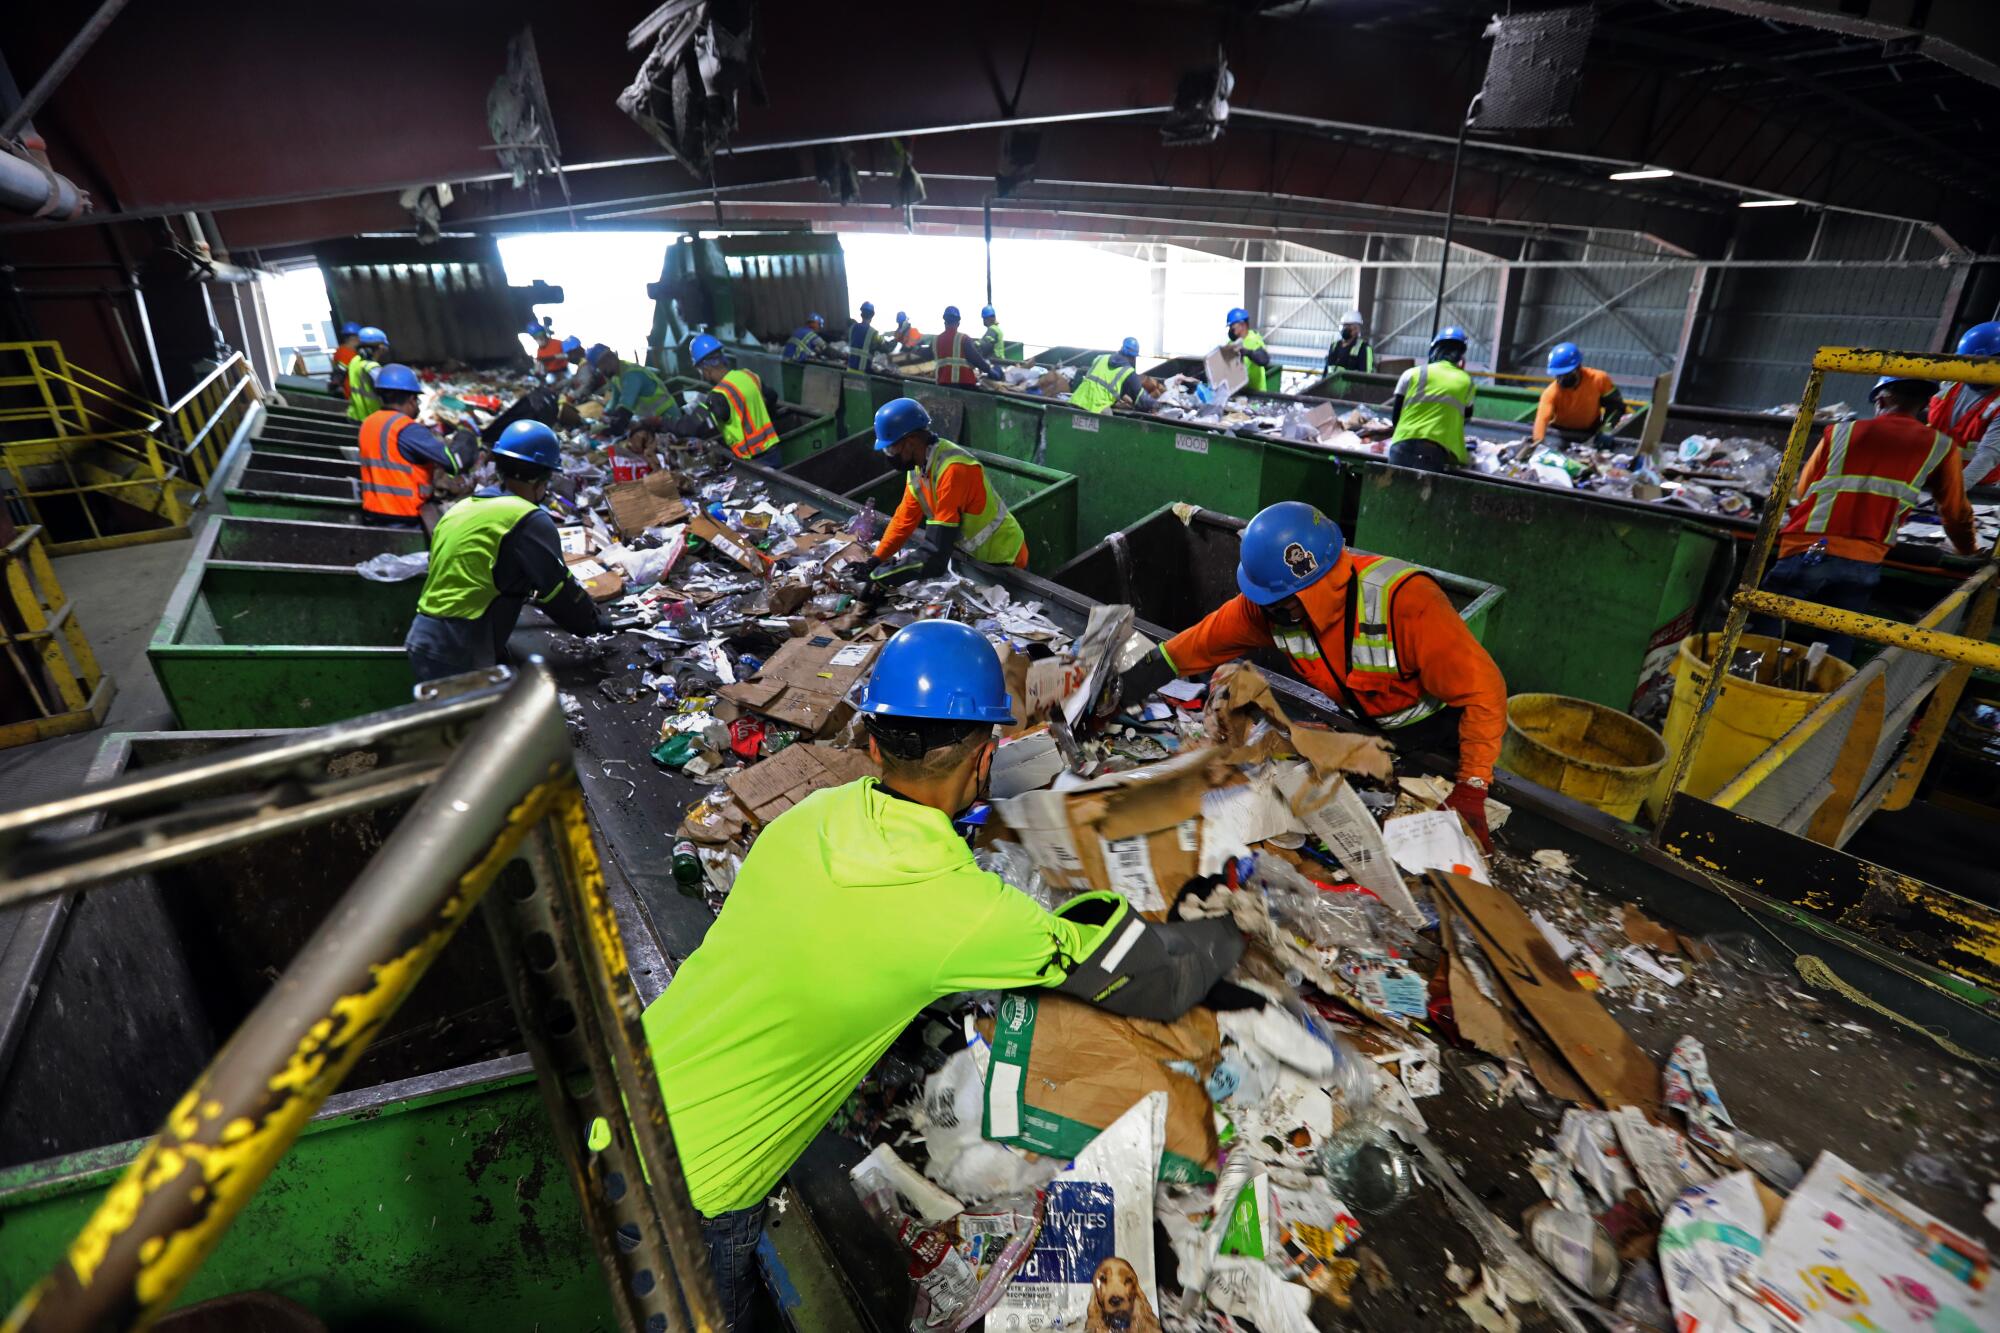 Surprise cancelled its recycling program. Here's how the numbers